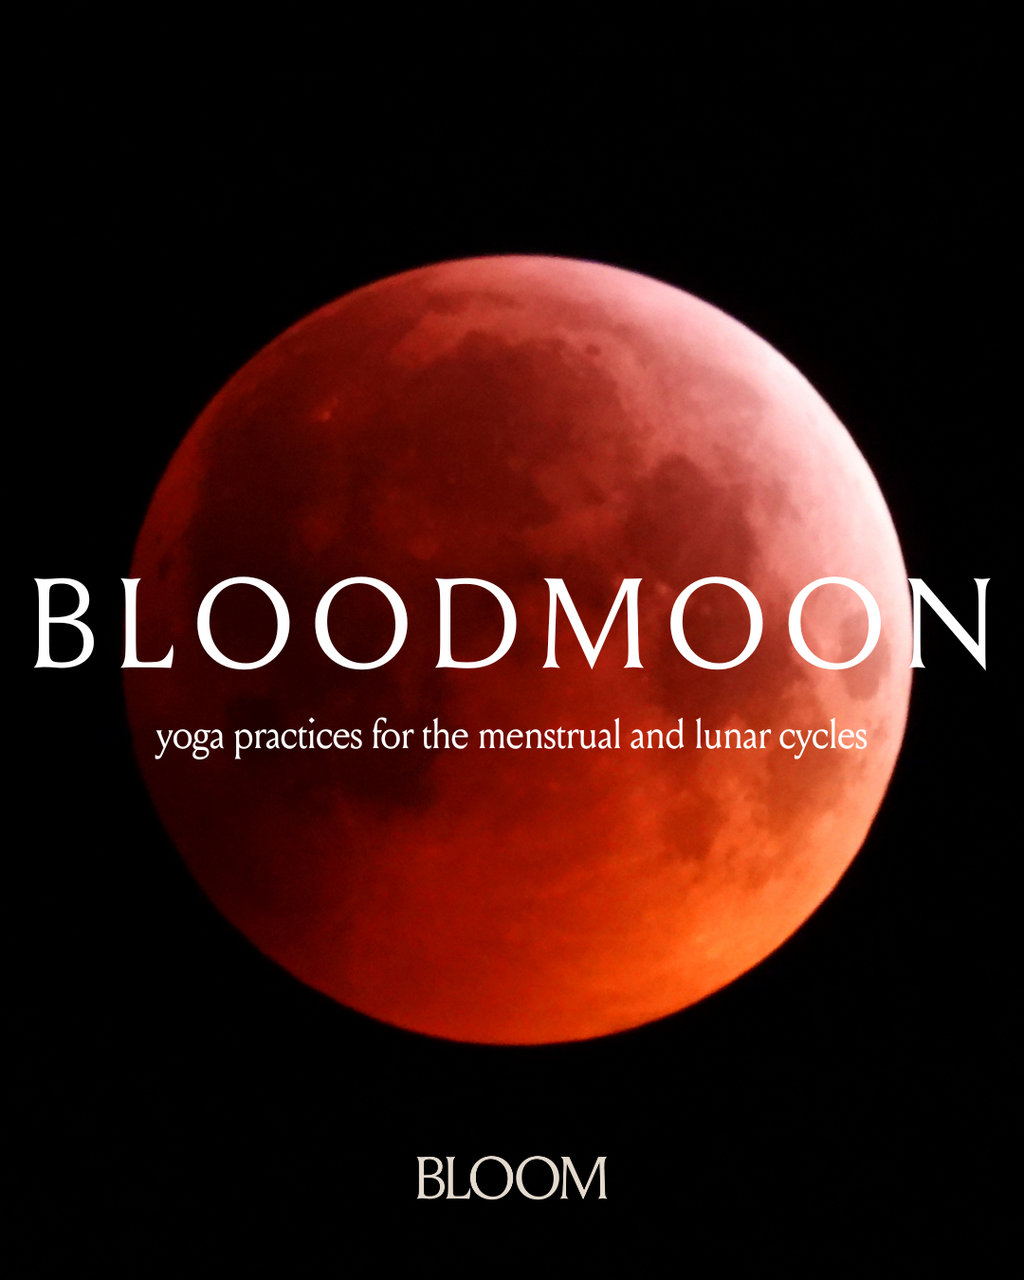 BLOODMOON: Practices for menstrual & lunar cycles